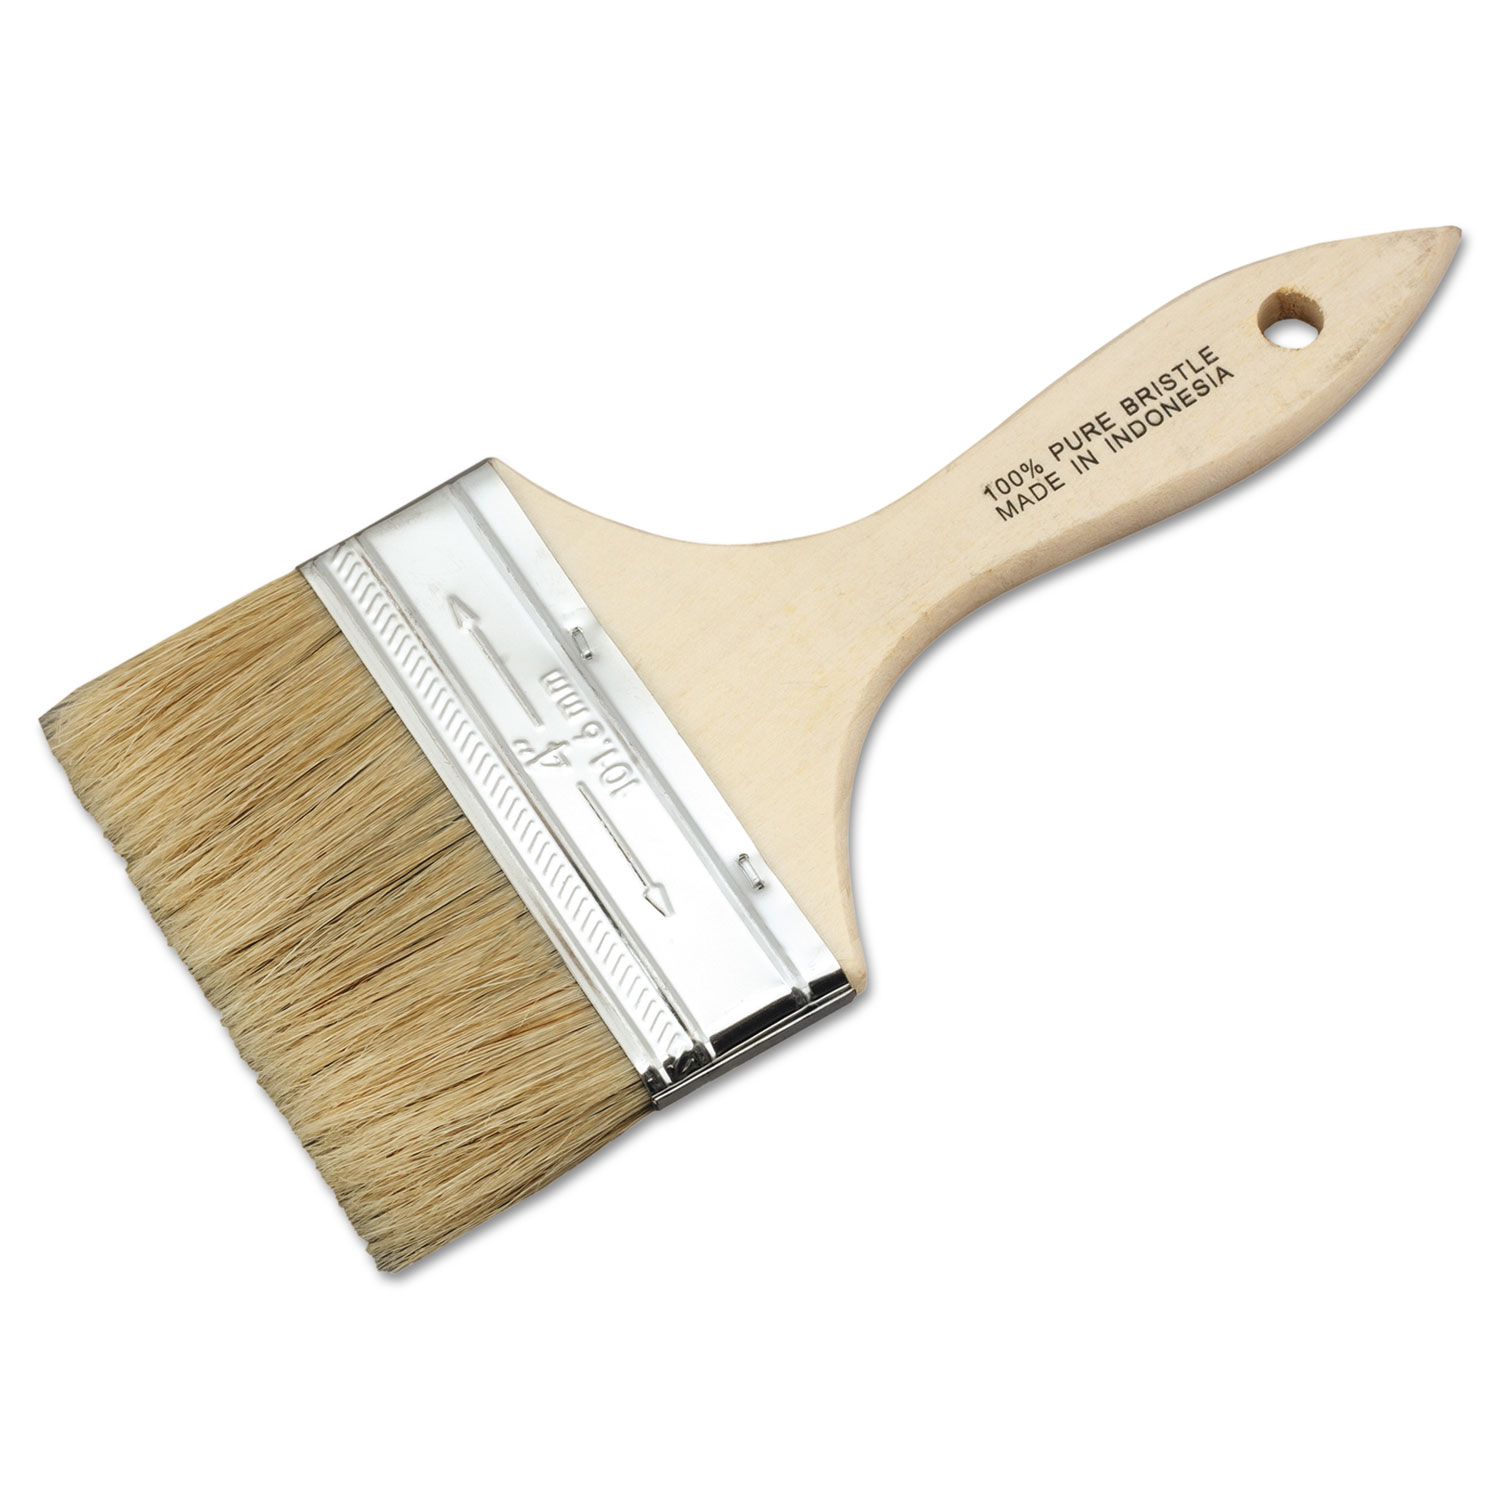 Magnolia Brush Low Cost Paint or Chip Brush, 4